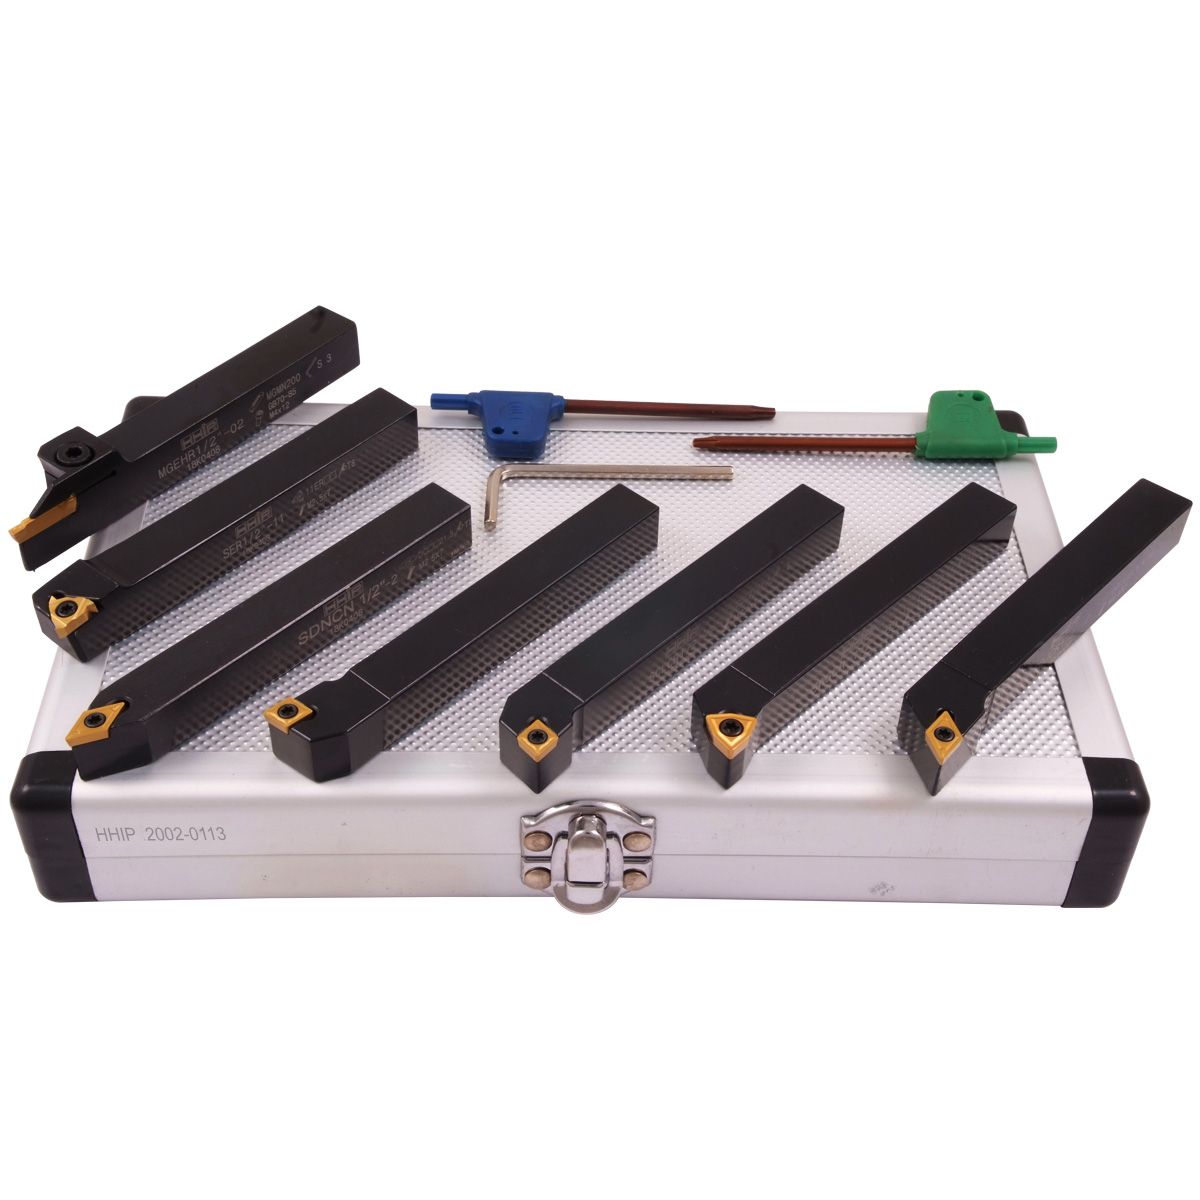 PRO-SERIES 7 PIECE 1/2 INDEXABLE CUT OFF & TURNING TOOL SET (2002-0113)